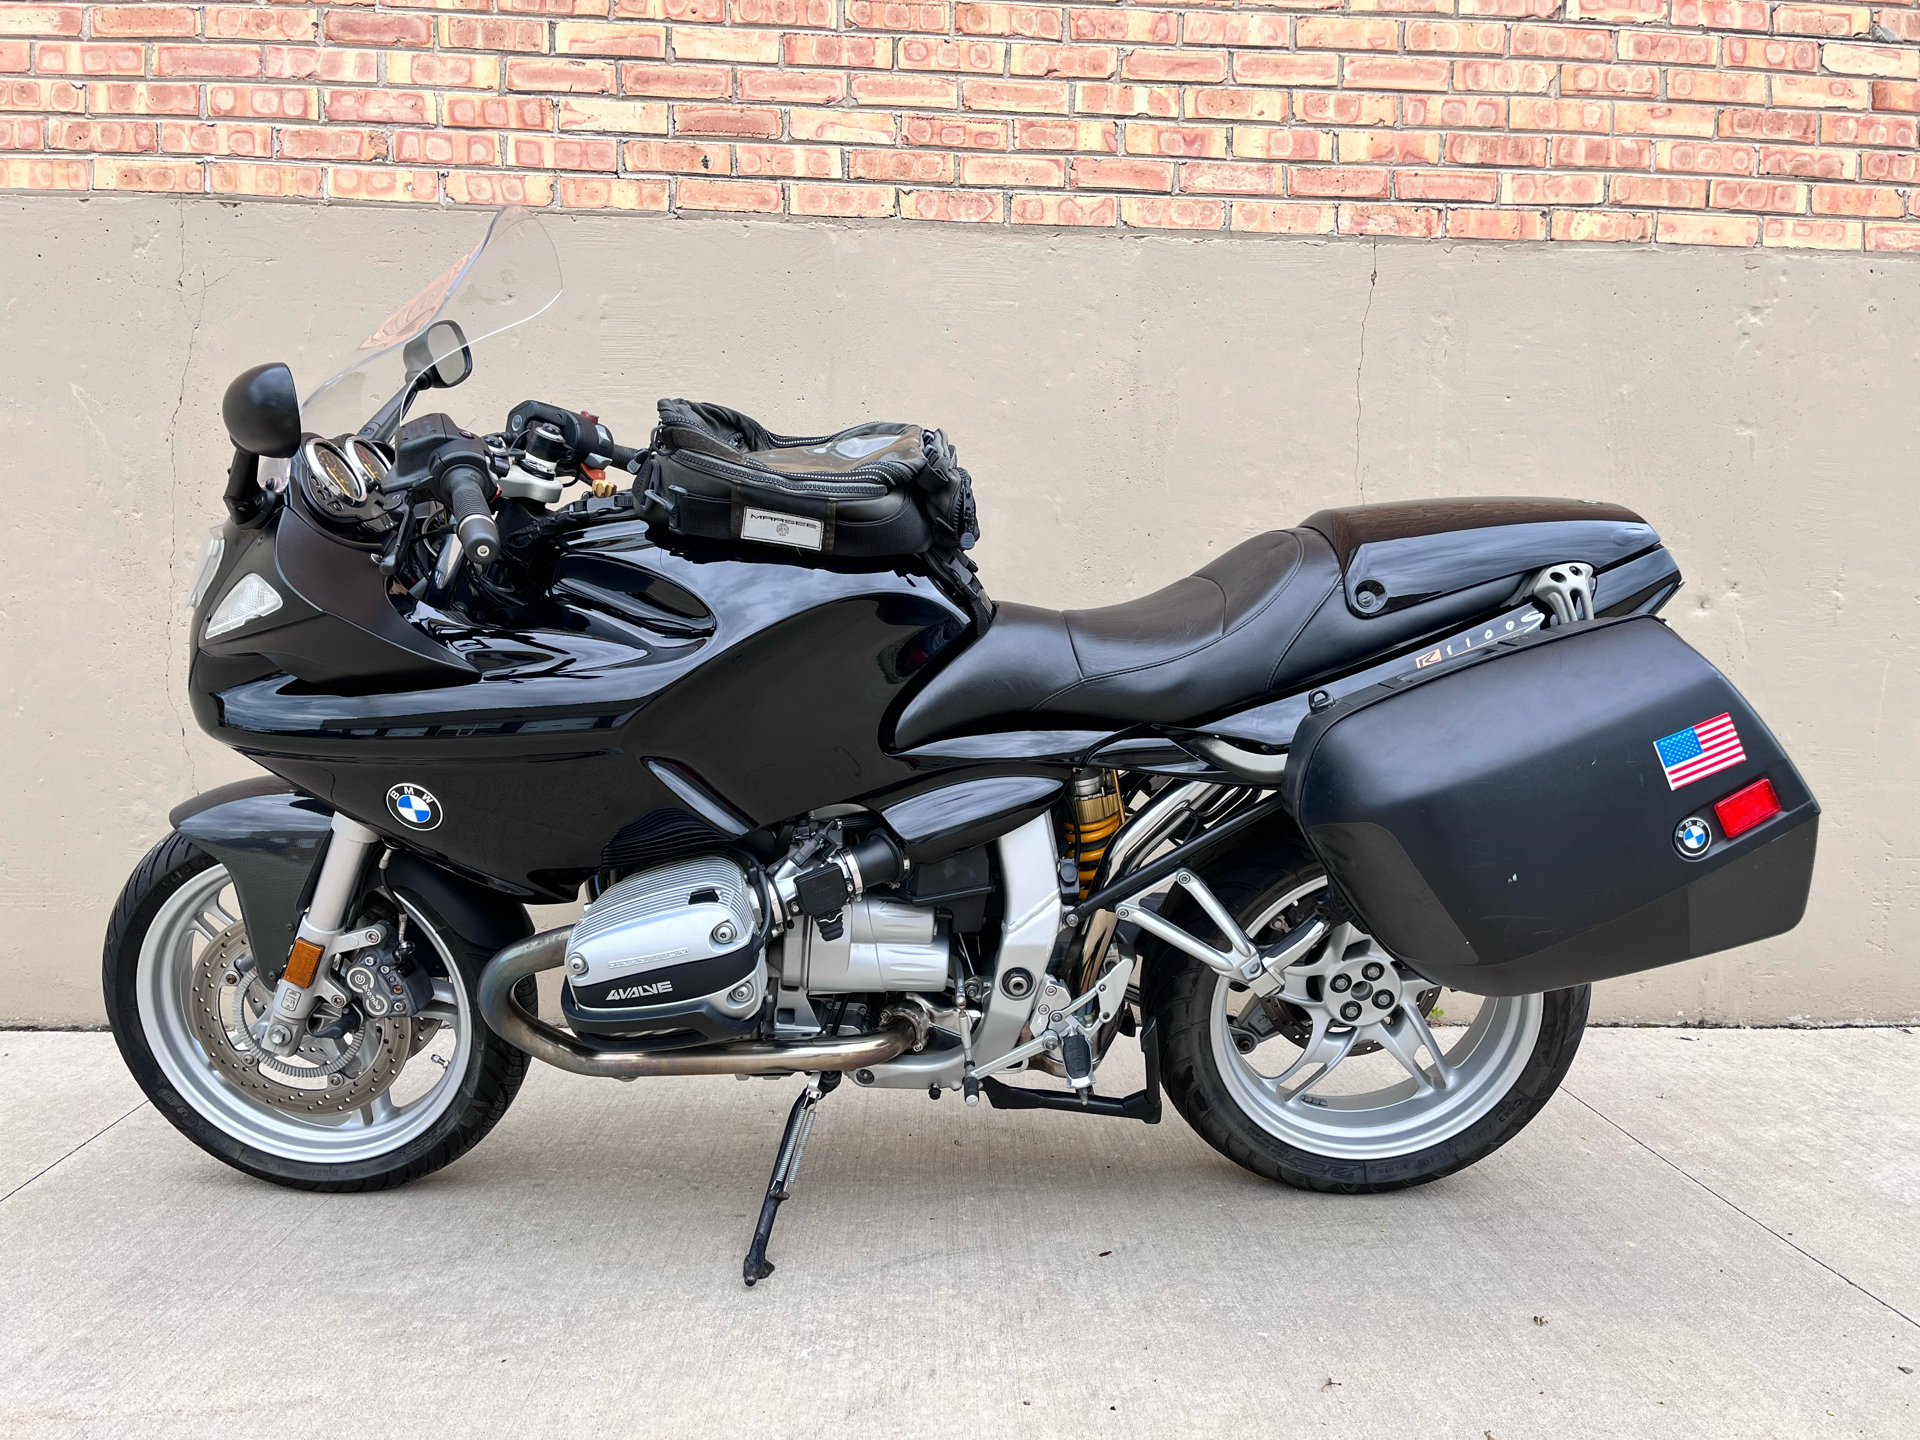 1999 BMW R 1100 S in Roselle, Illinois - Photo 12